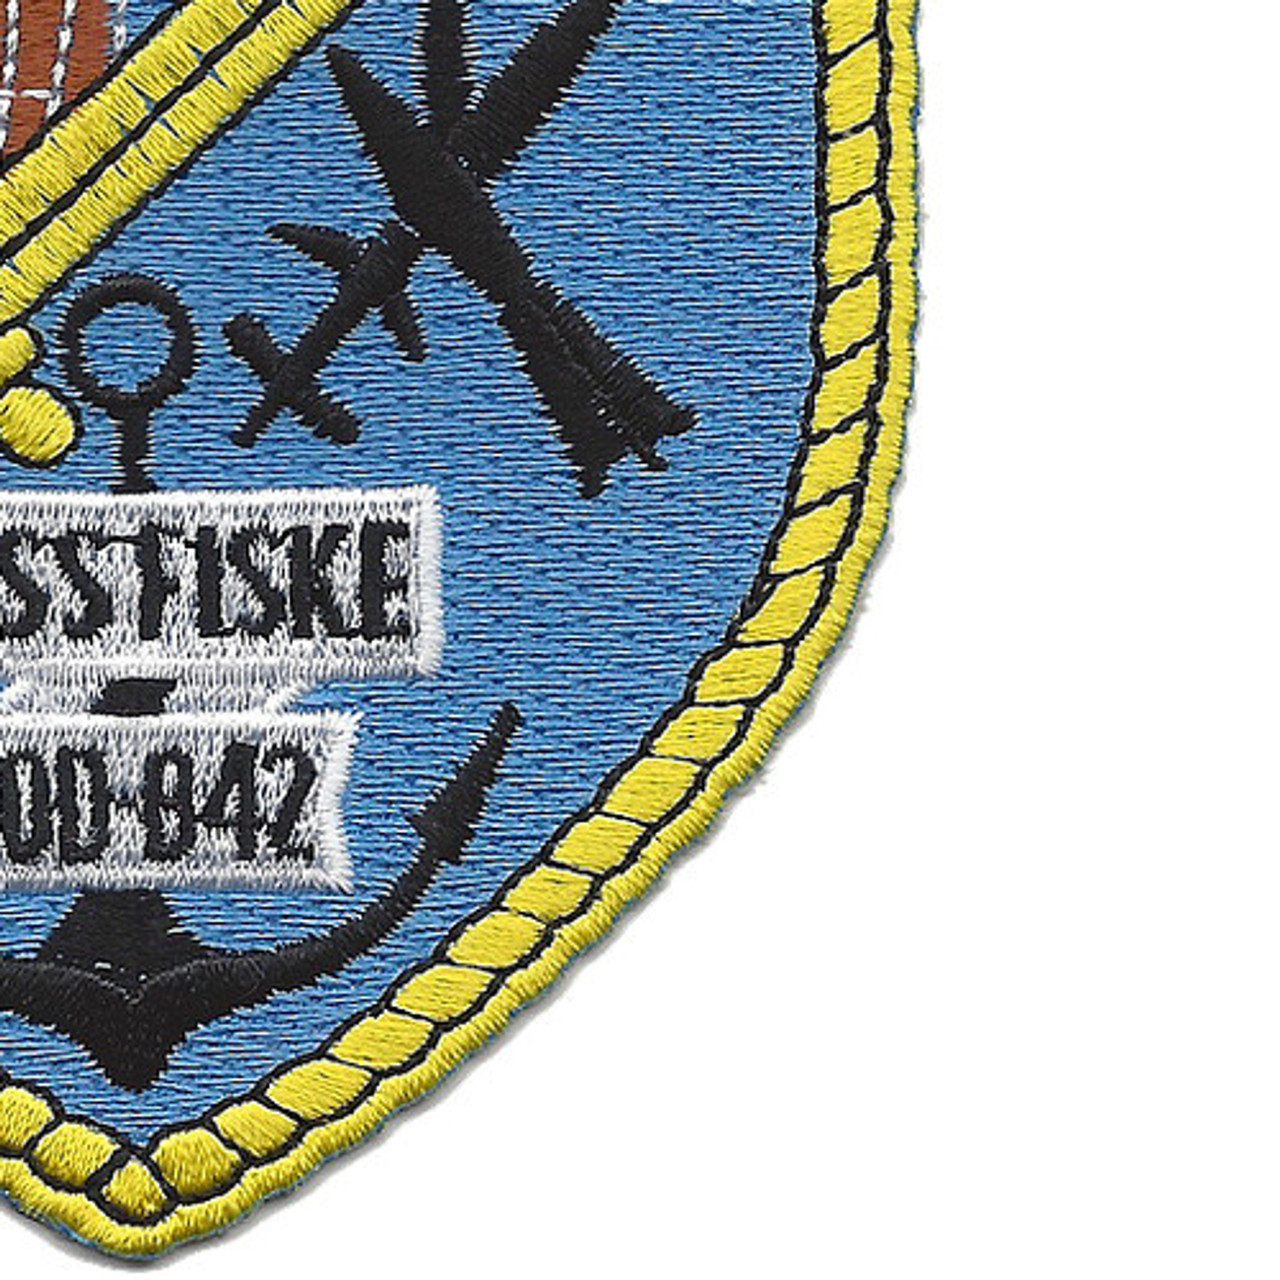 US NAVY DD-842 USS FISKE Gearing-Class Destroyer Military Patch DETECT DESTROY 